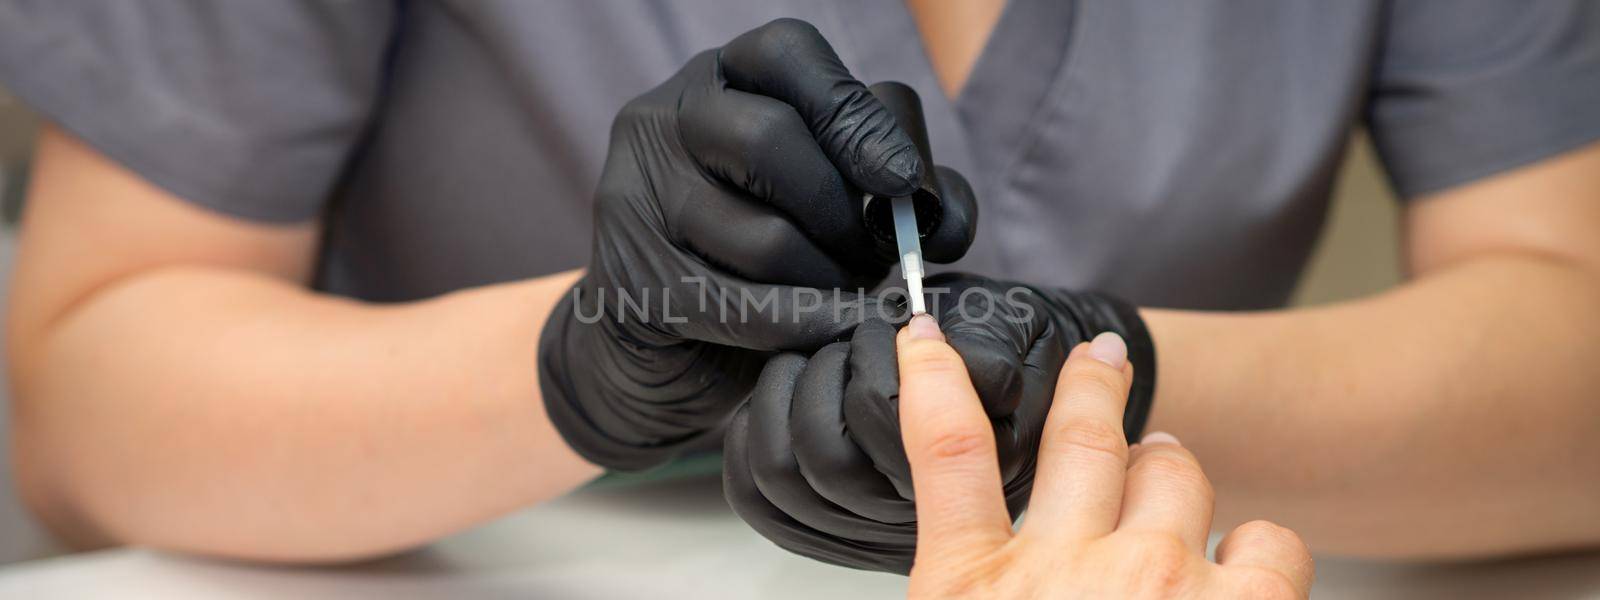 Painting female nails. Hands of manicurist in black gloves is applying transparent nail polish on female nails in a manicure salon. by okskukuruza